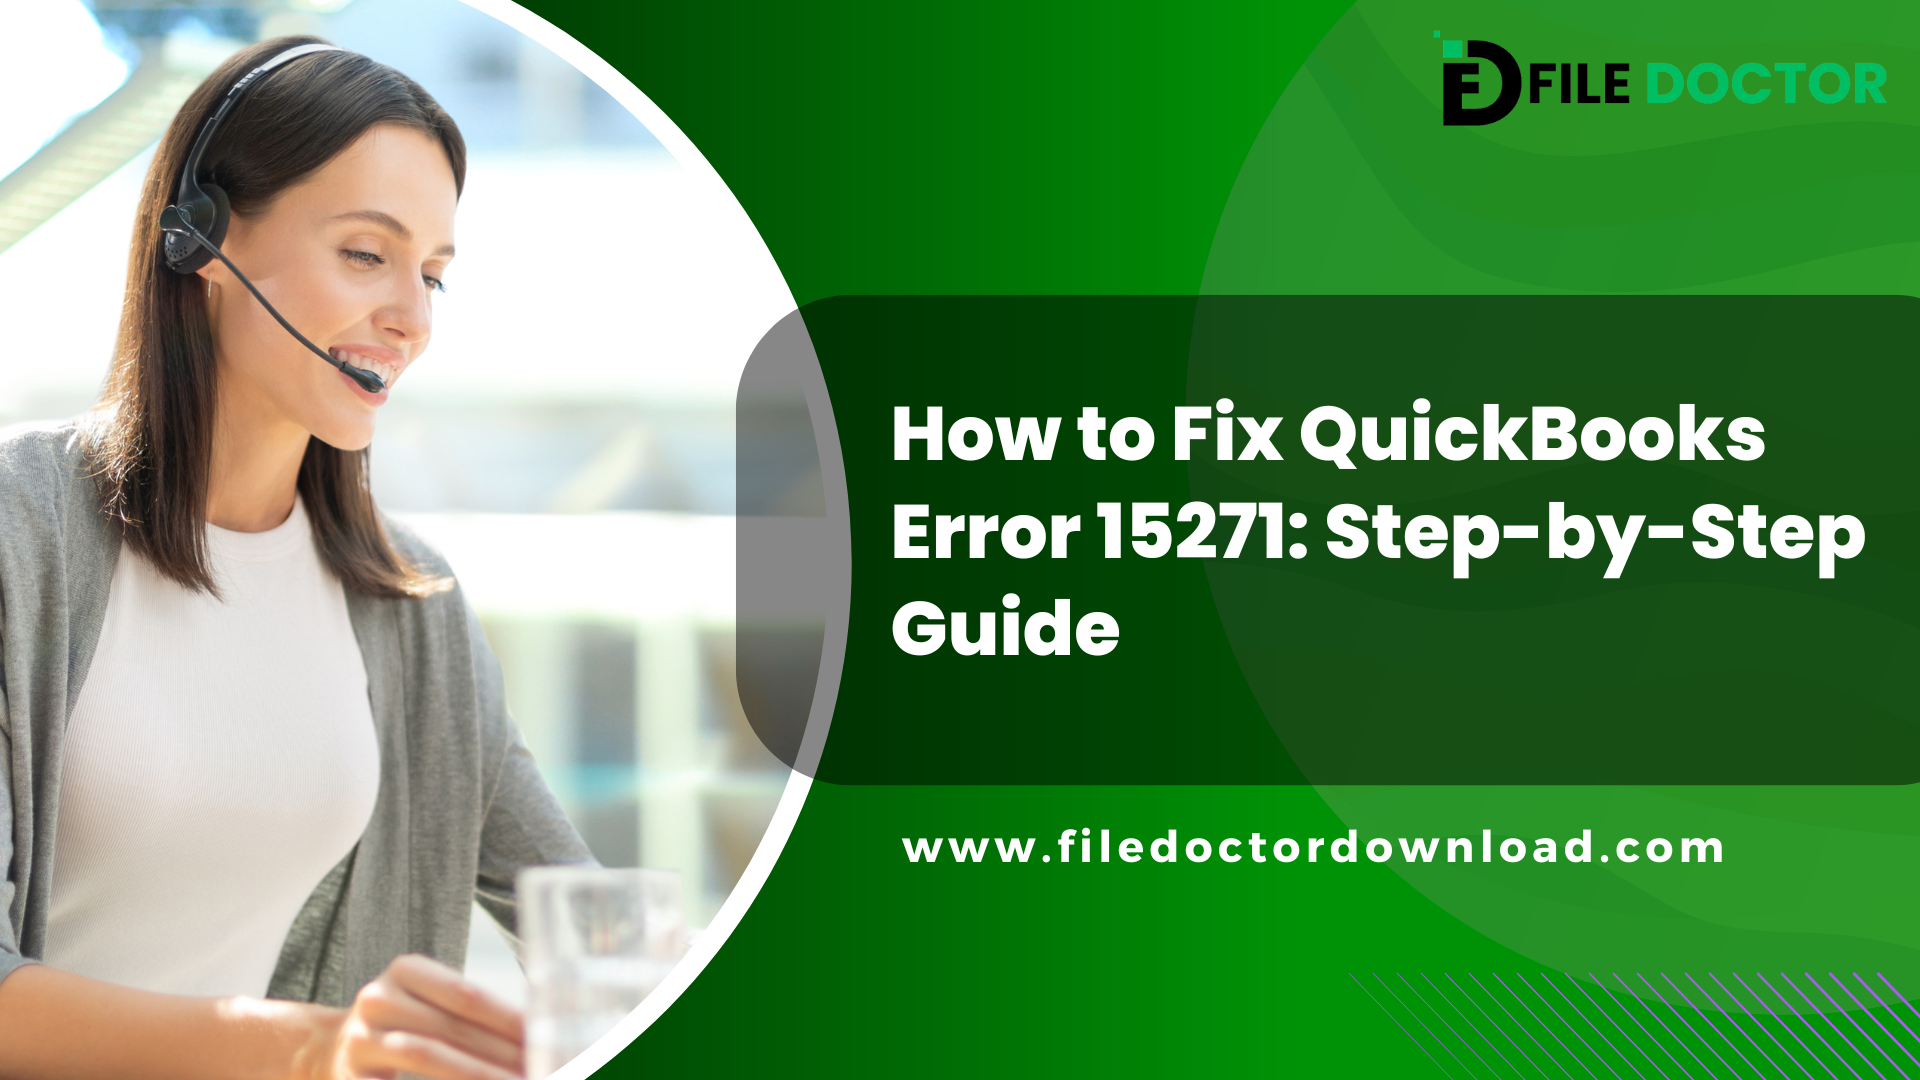 How to Fix QuickBooks Error 15271: Step-by-Step Guide